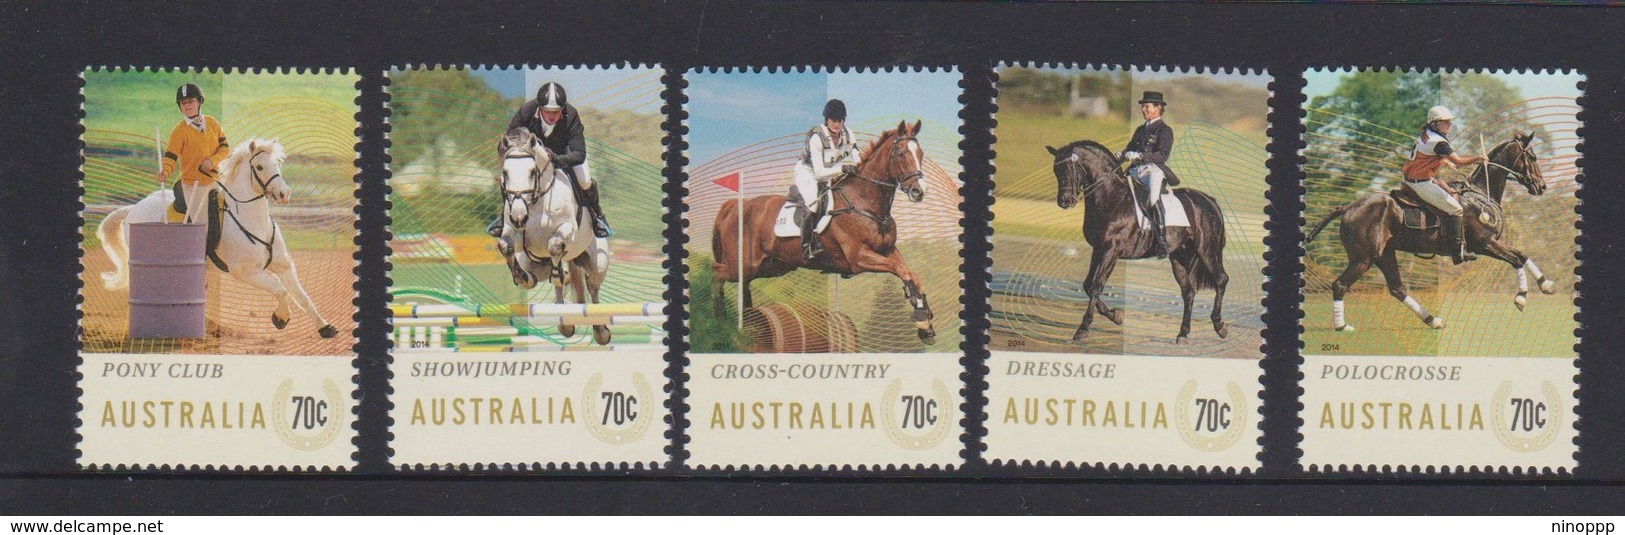 Australia ASC 3213-3217 Equestrian Events,mint Never Hinged - Mint Stamps